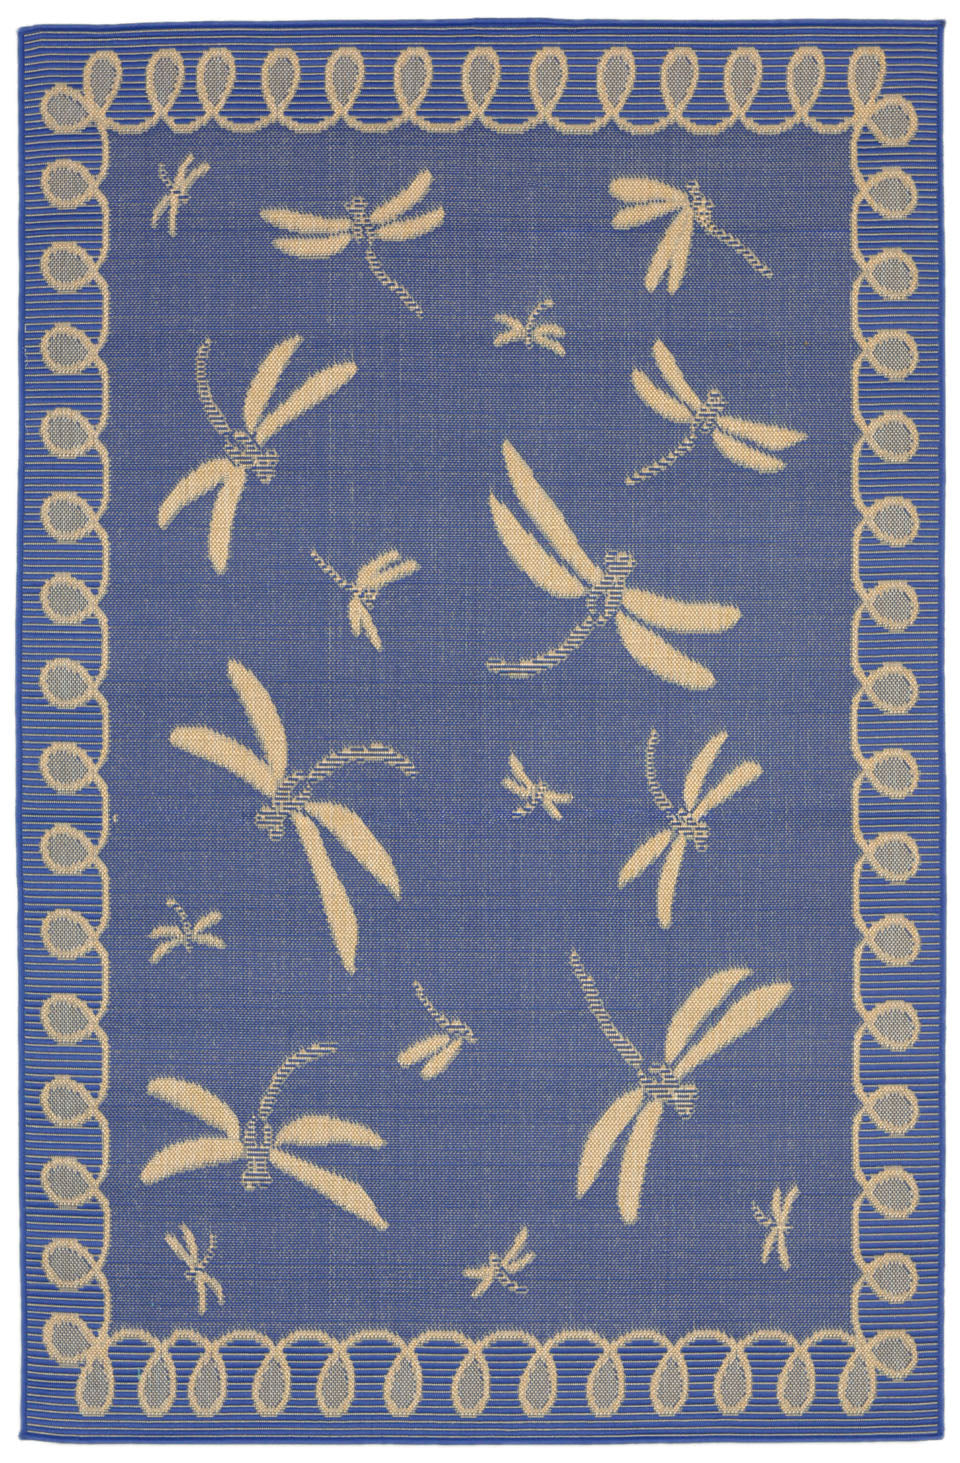 Trans Ocean Terrace Dragonfly Blue Area Rug by Liora Manne main image